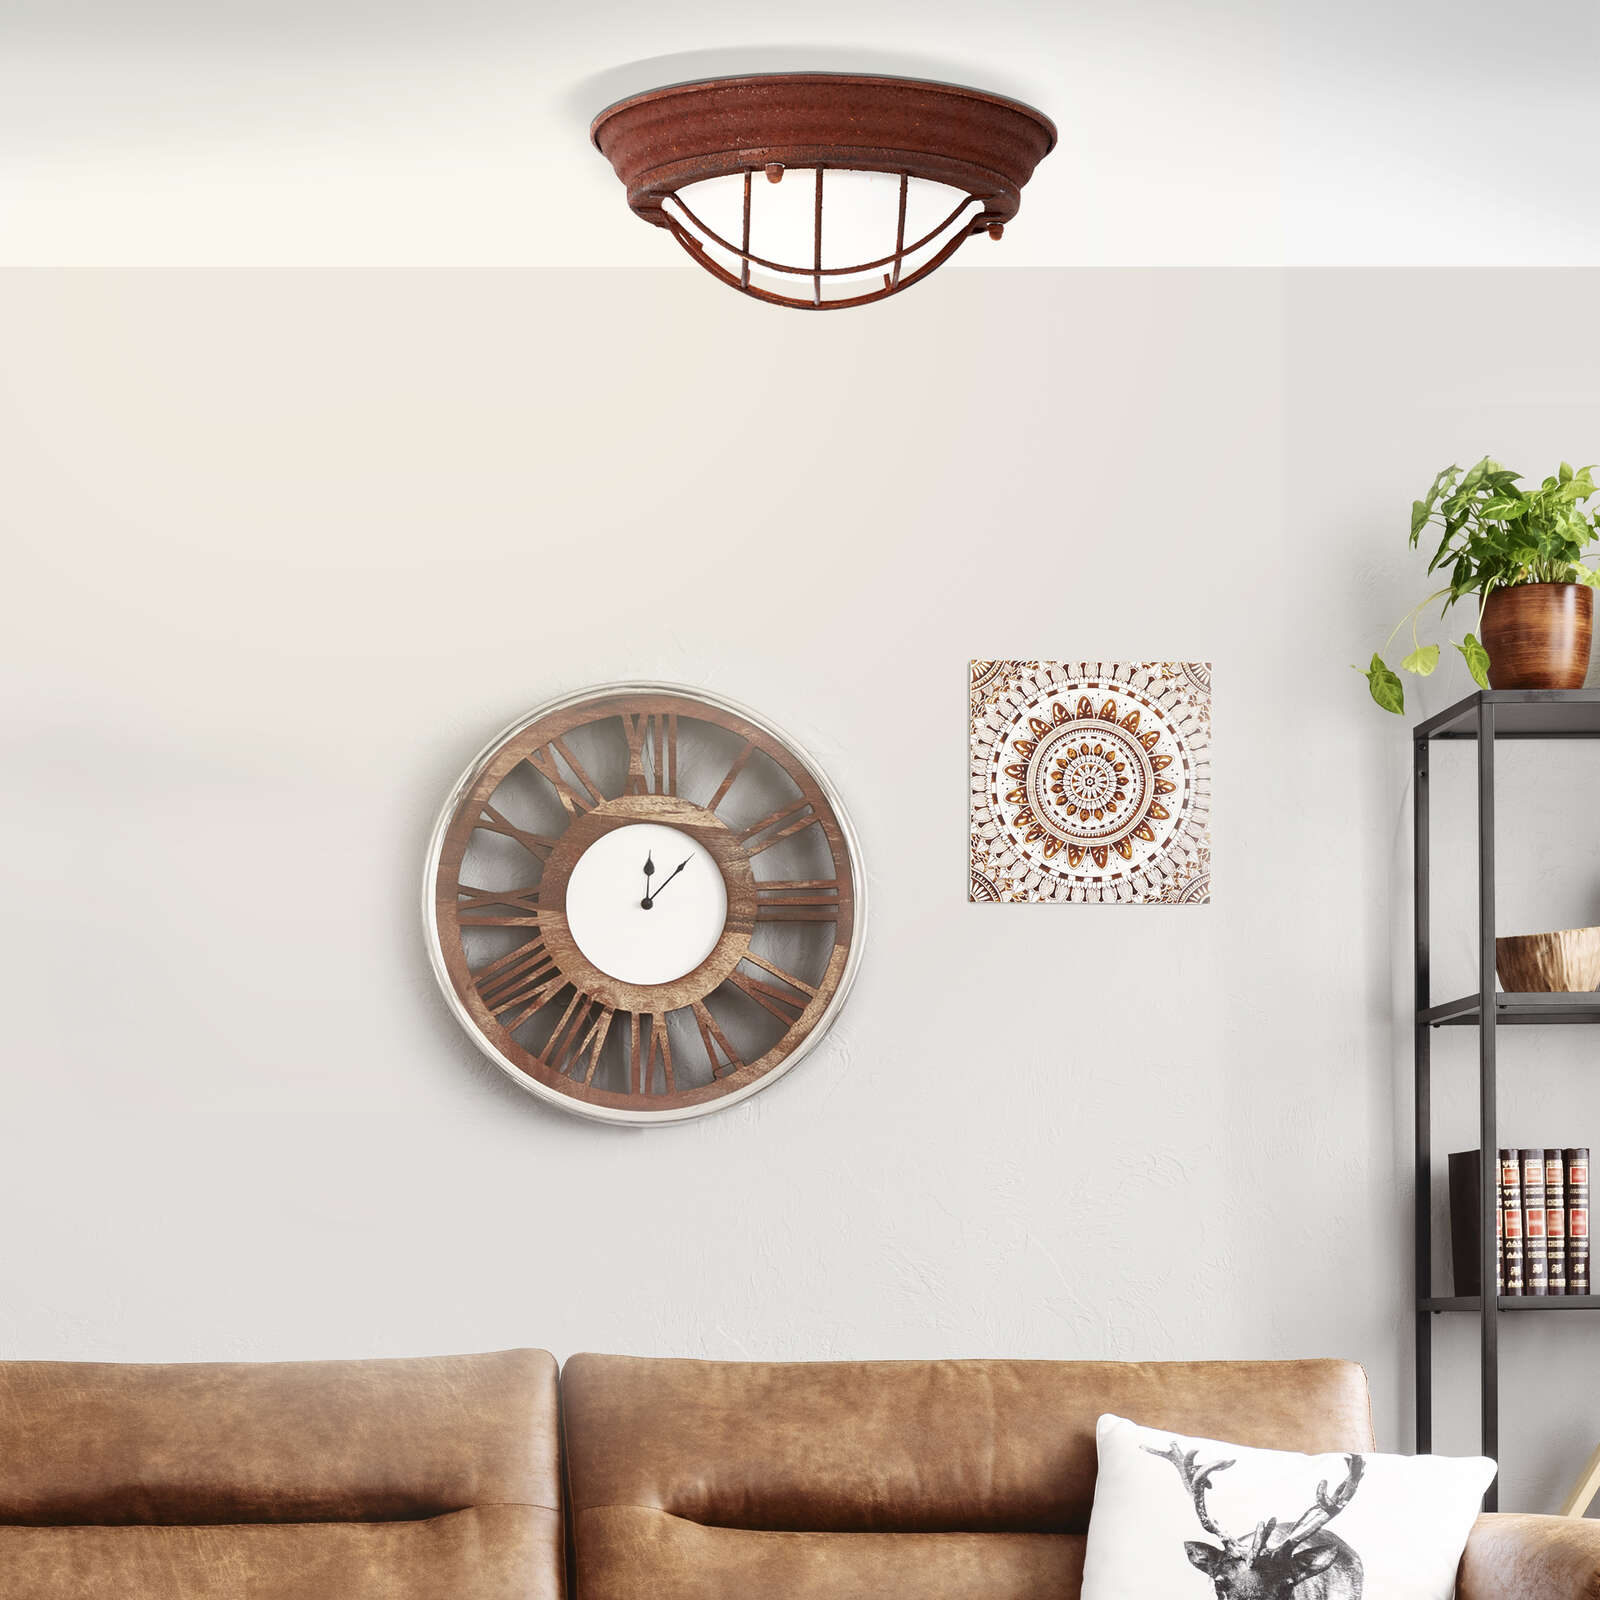             Metal wall and ceiling light - Sina 5 - Brown
        